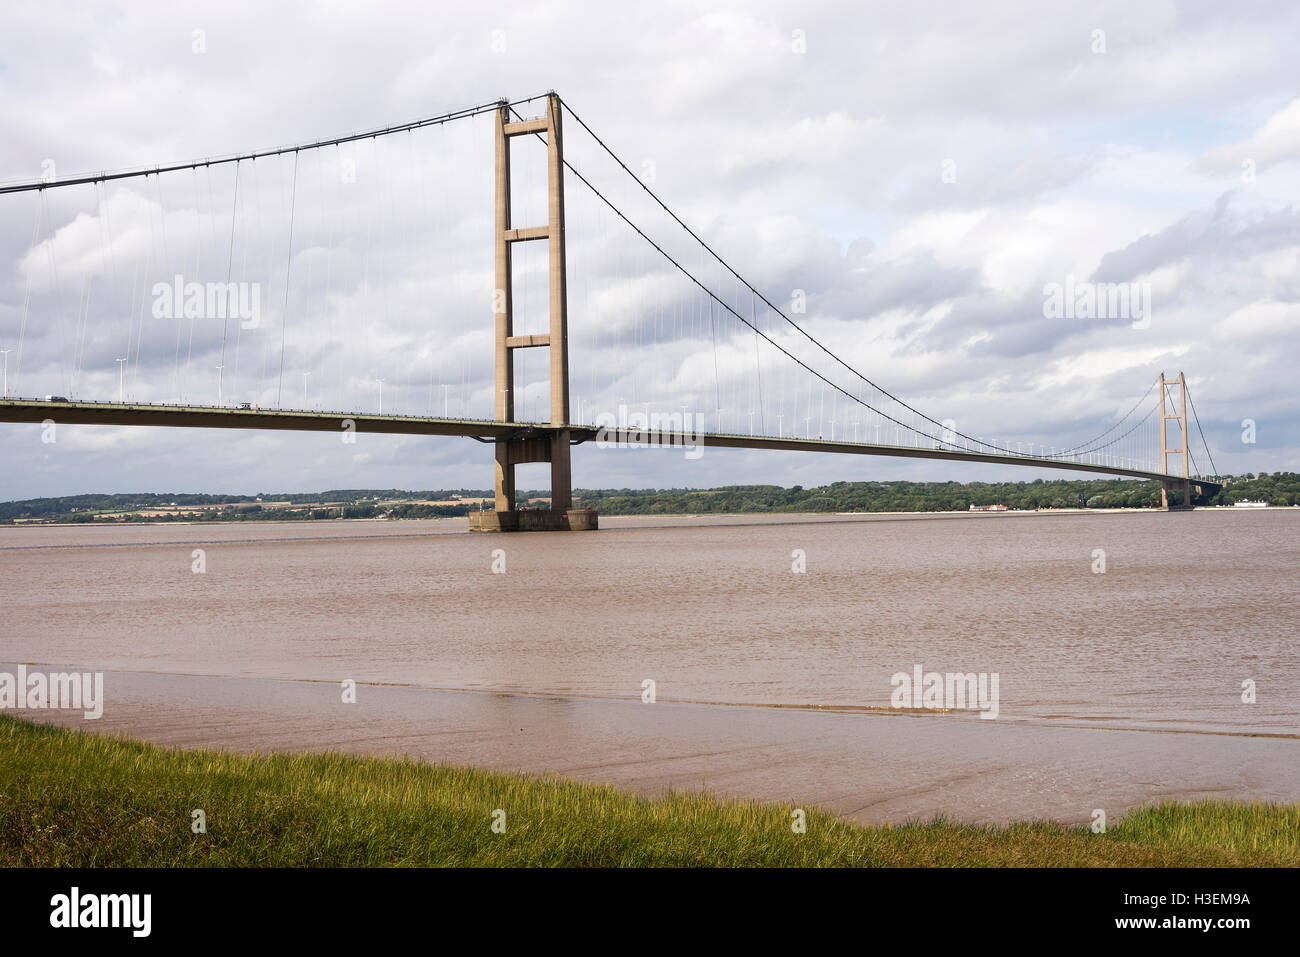 The Humber Suspension Bridge Crossing the River Humber Estuary from Lincolnshire to Yorkshire England United Kingdom UK Stock Photo